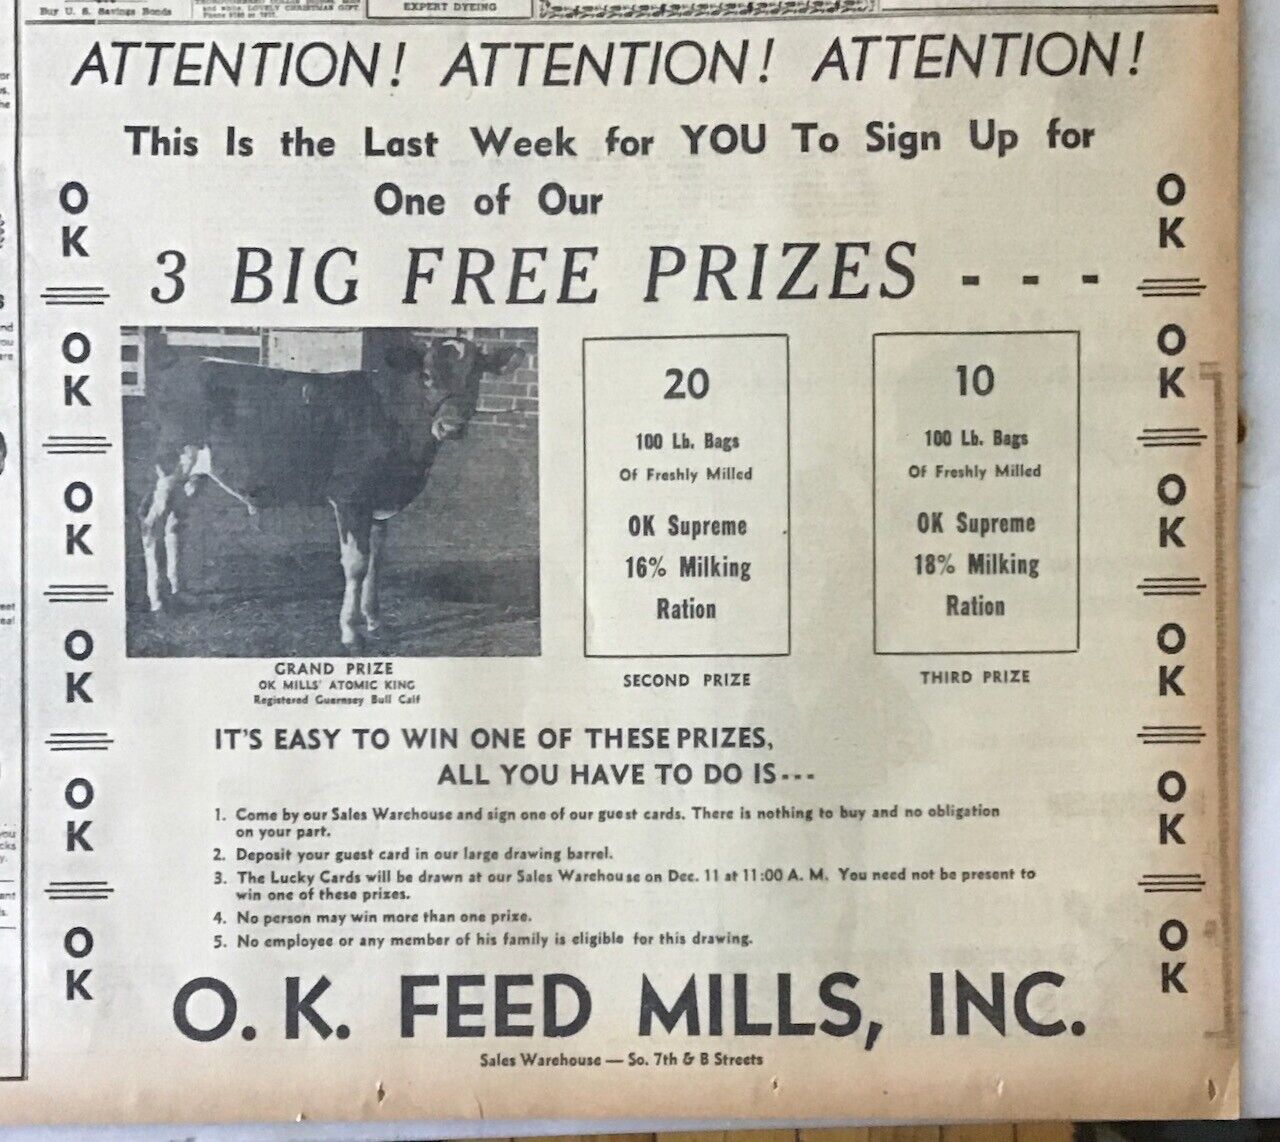 Large 1948 newspaper ad for O.K. Feed Mills - Win Atomic King Guernsey bull calf